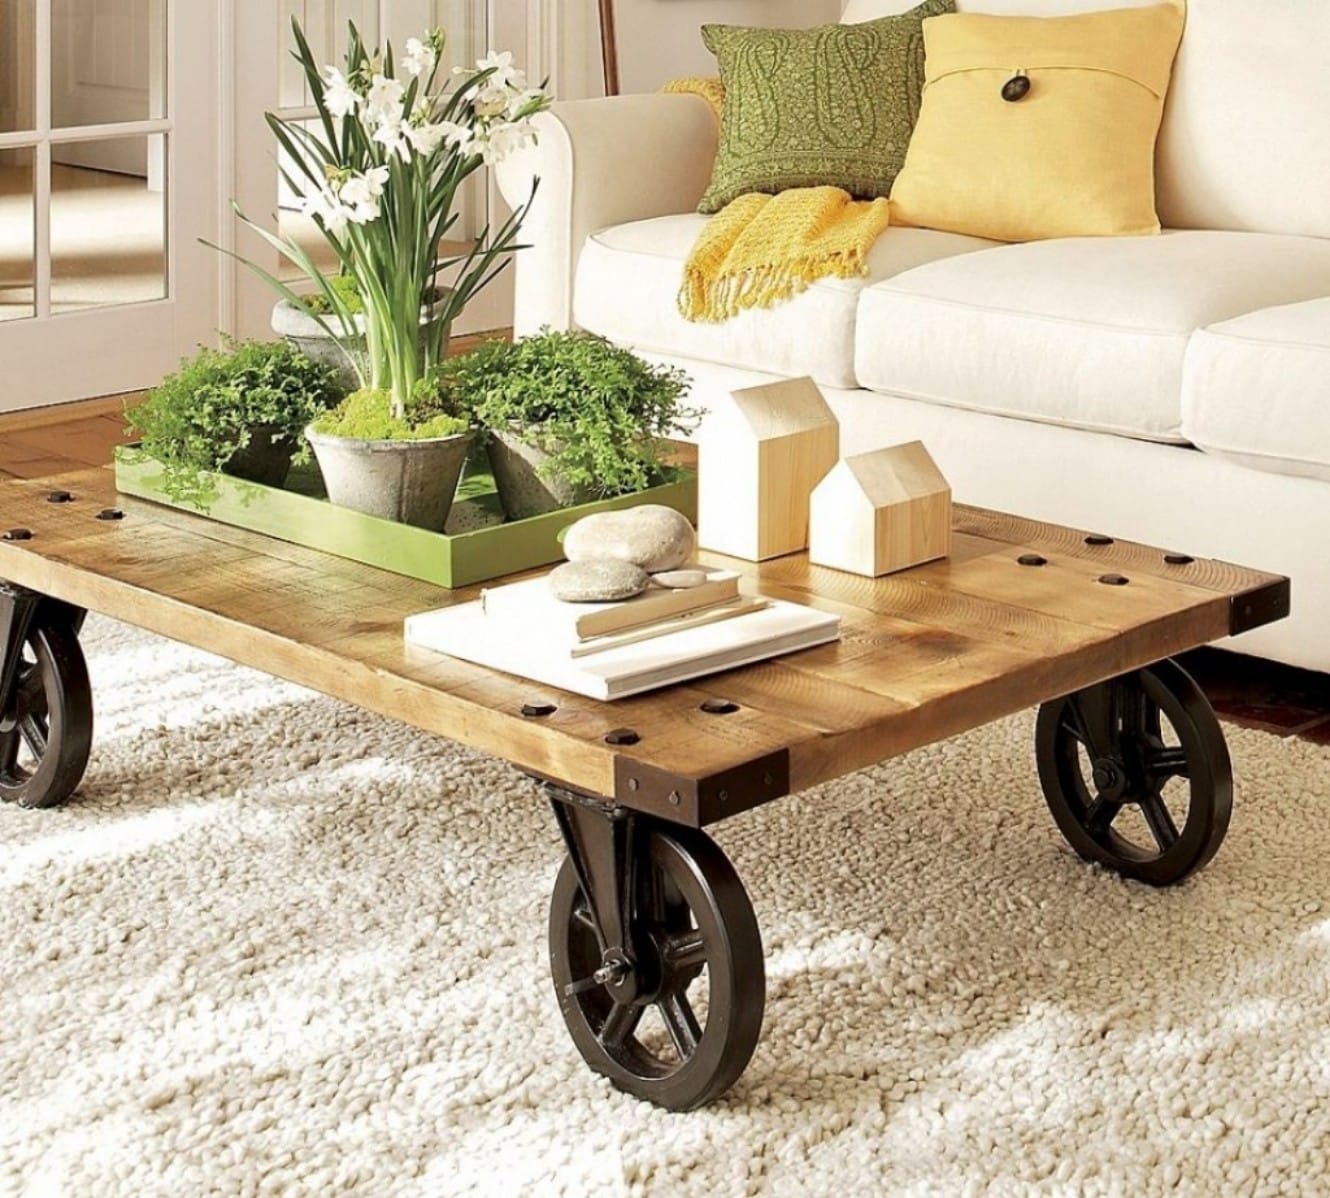 12 Modern Coffee and Side Tables With Wheels